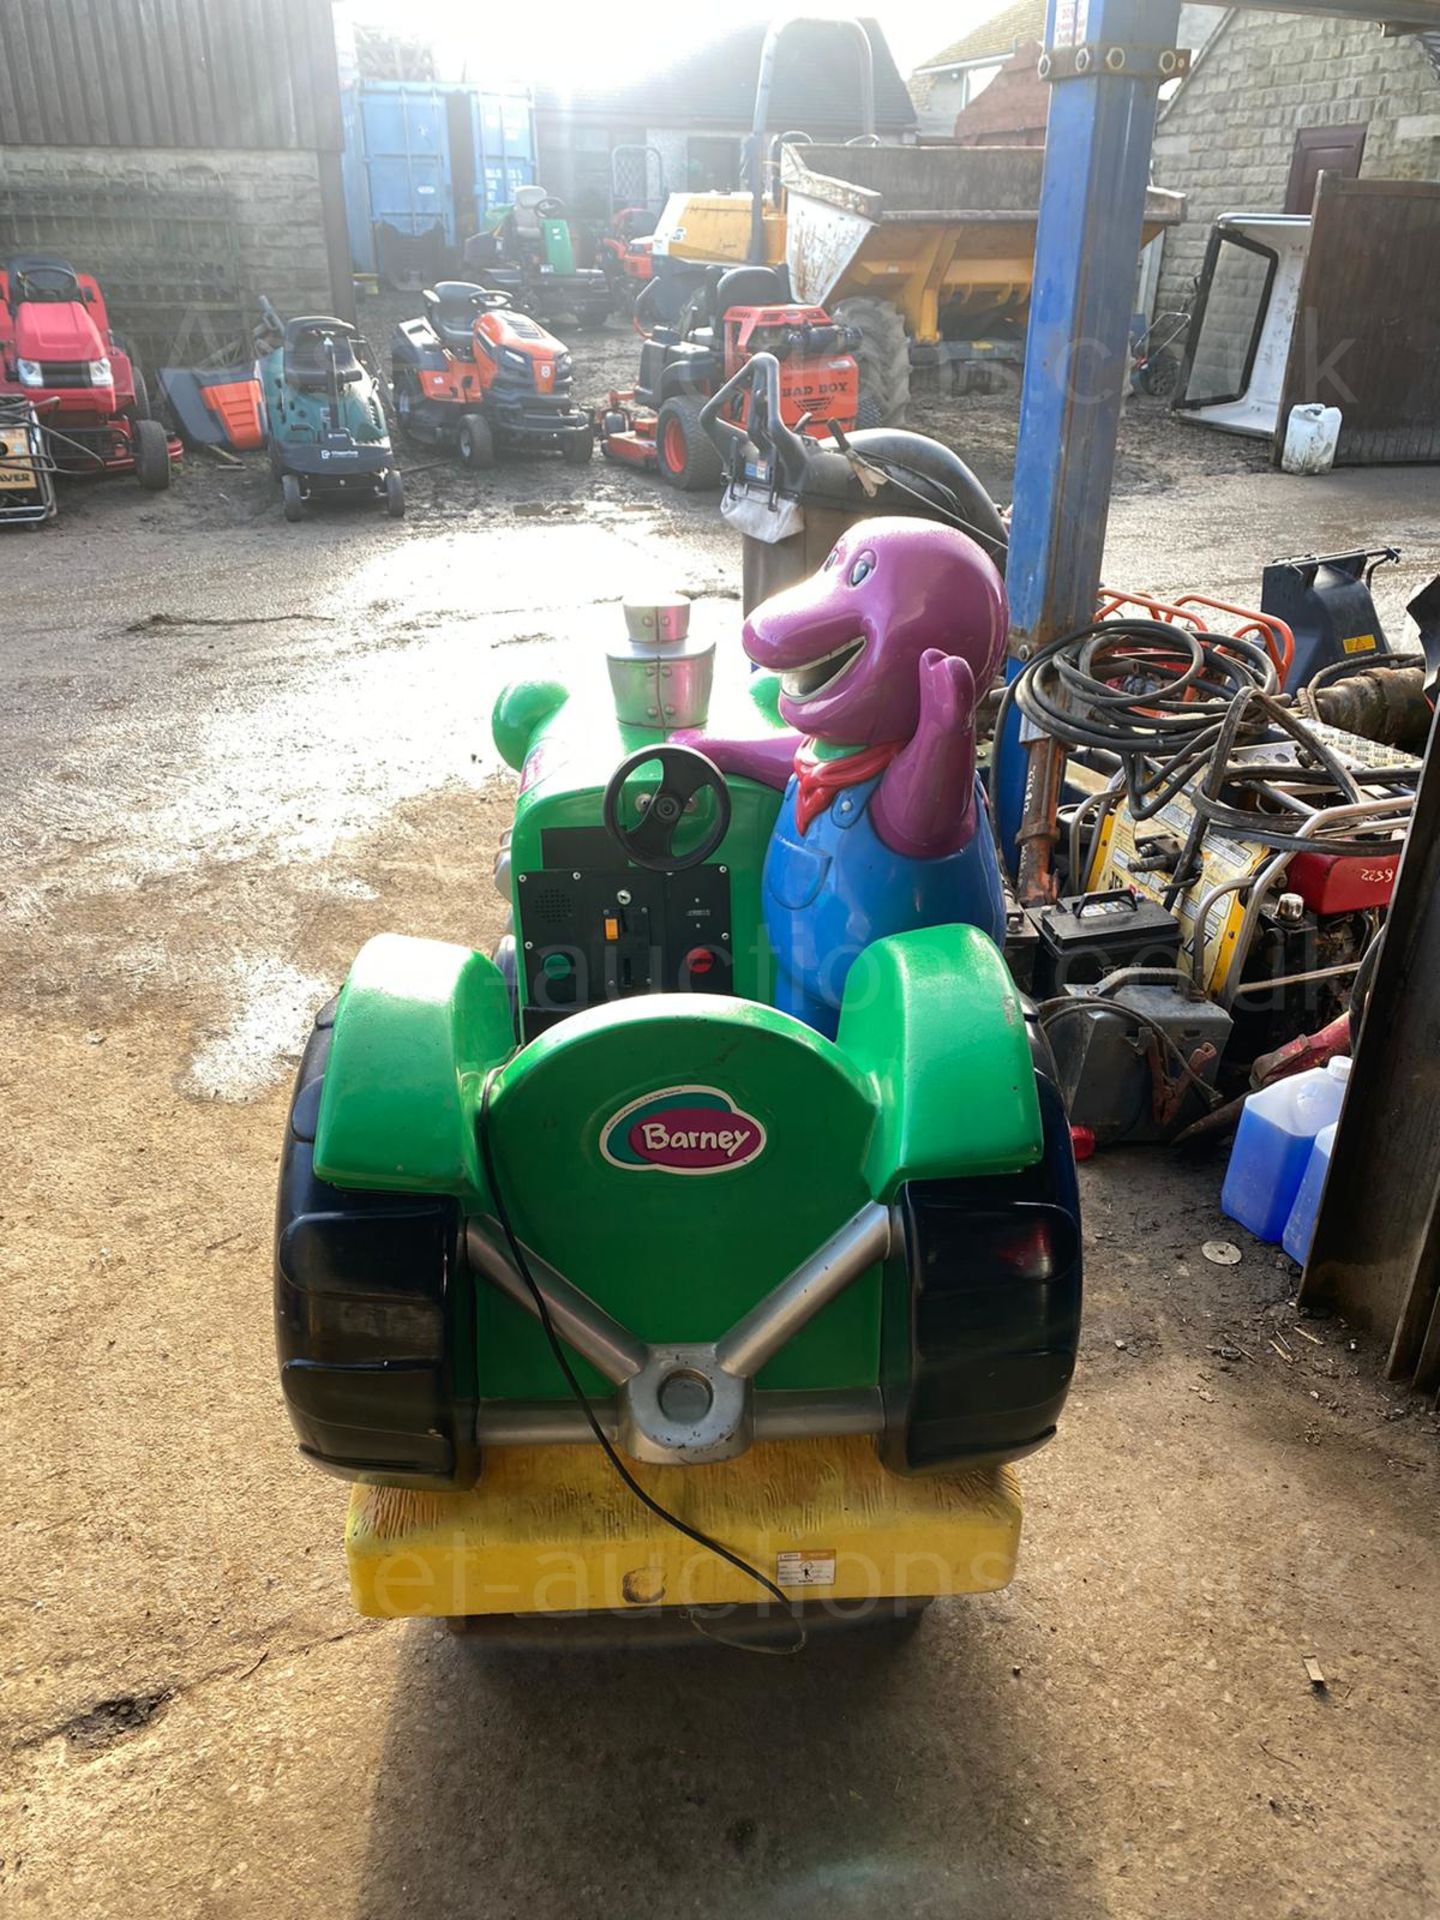 BARNEY KIDS COIN RIDE, 1 POUND TO PLAY, WORKING CONDITION *PLUS VAT* - Image 4 of 5